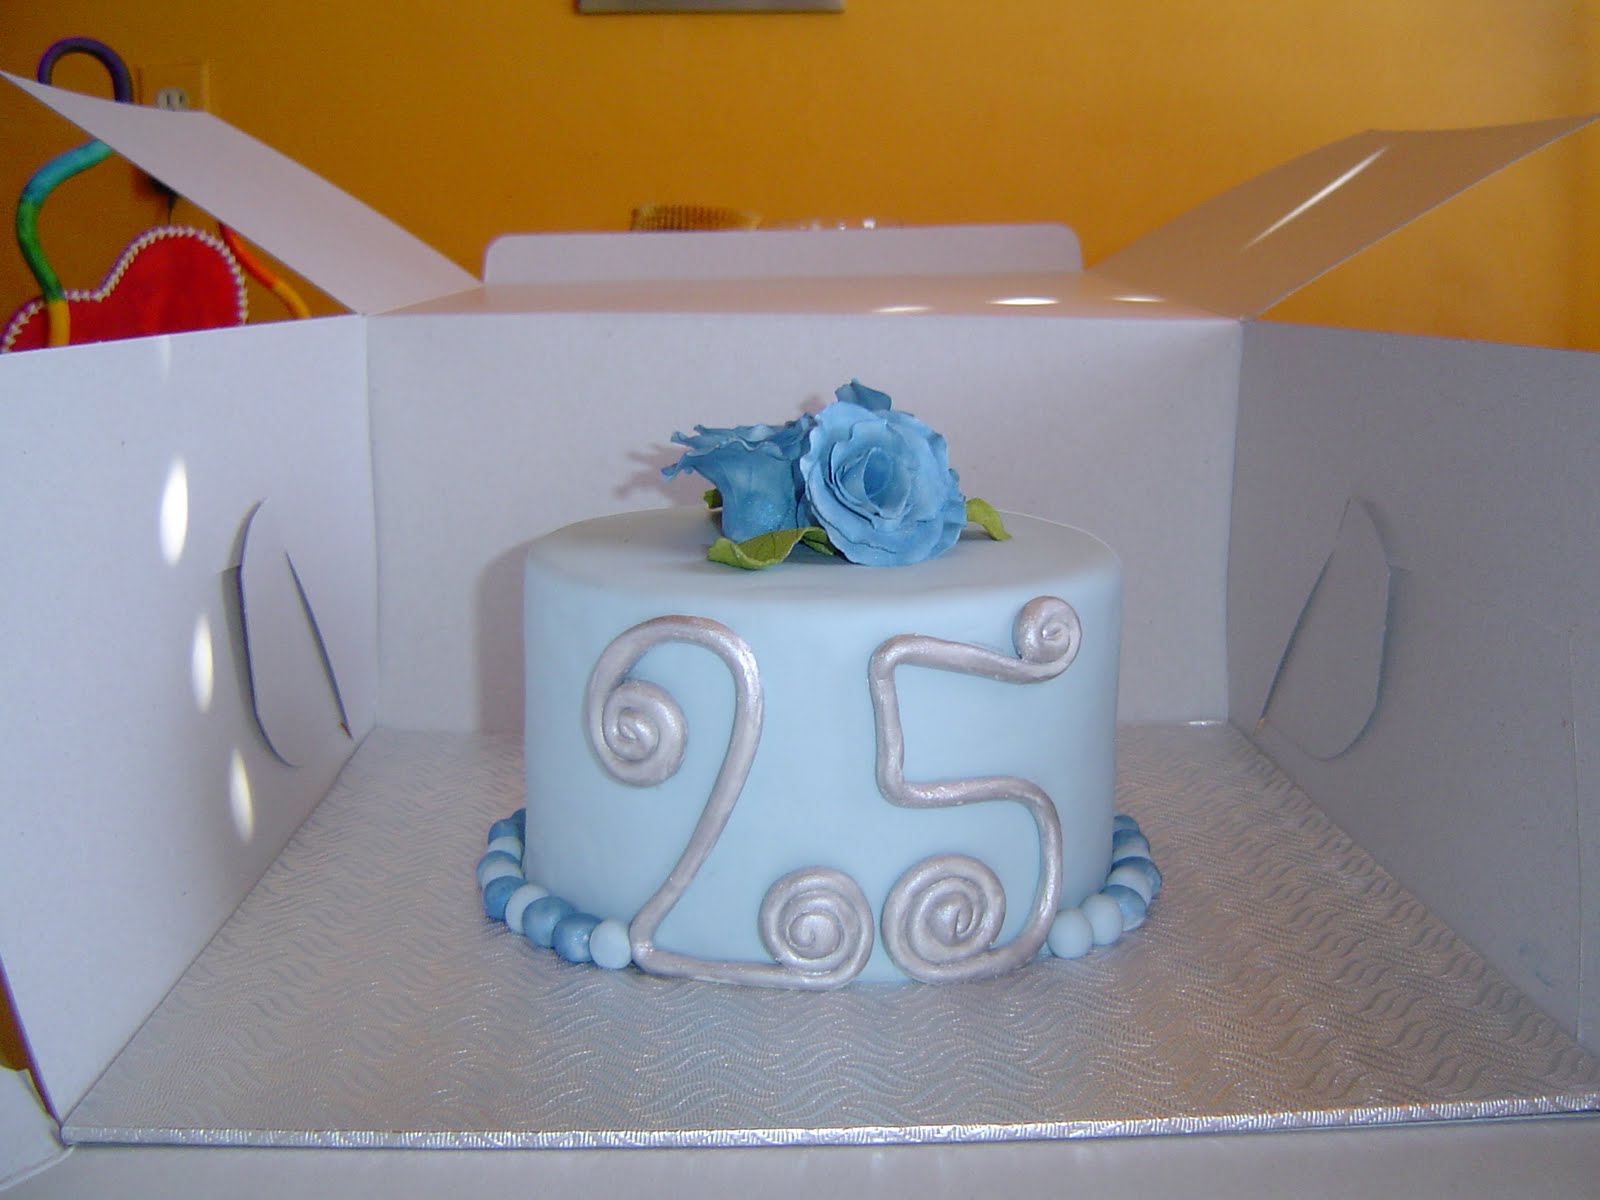 This light blue cake was